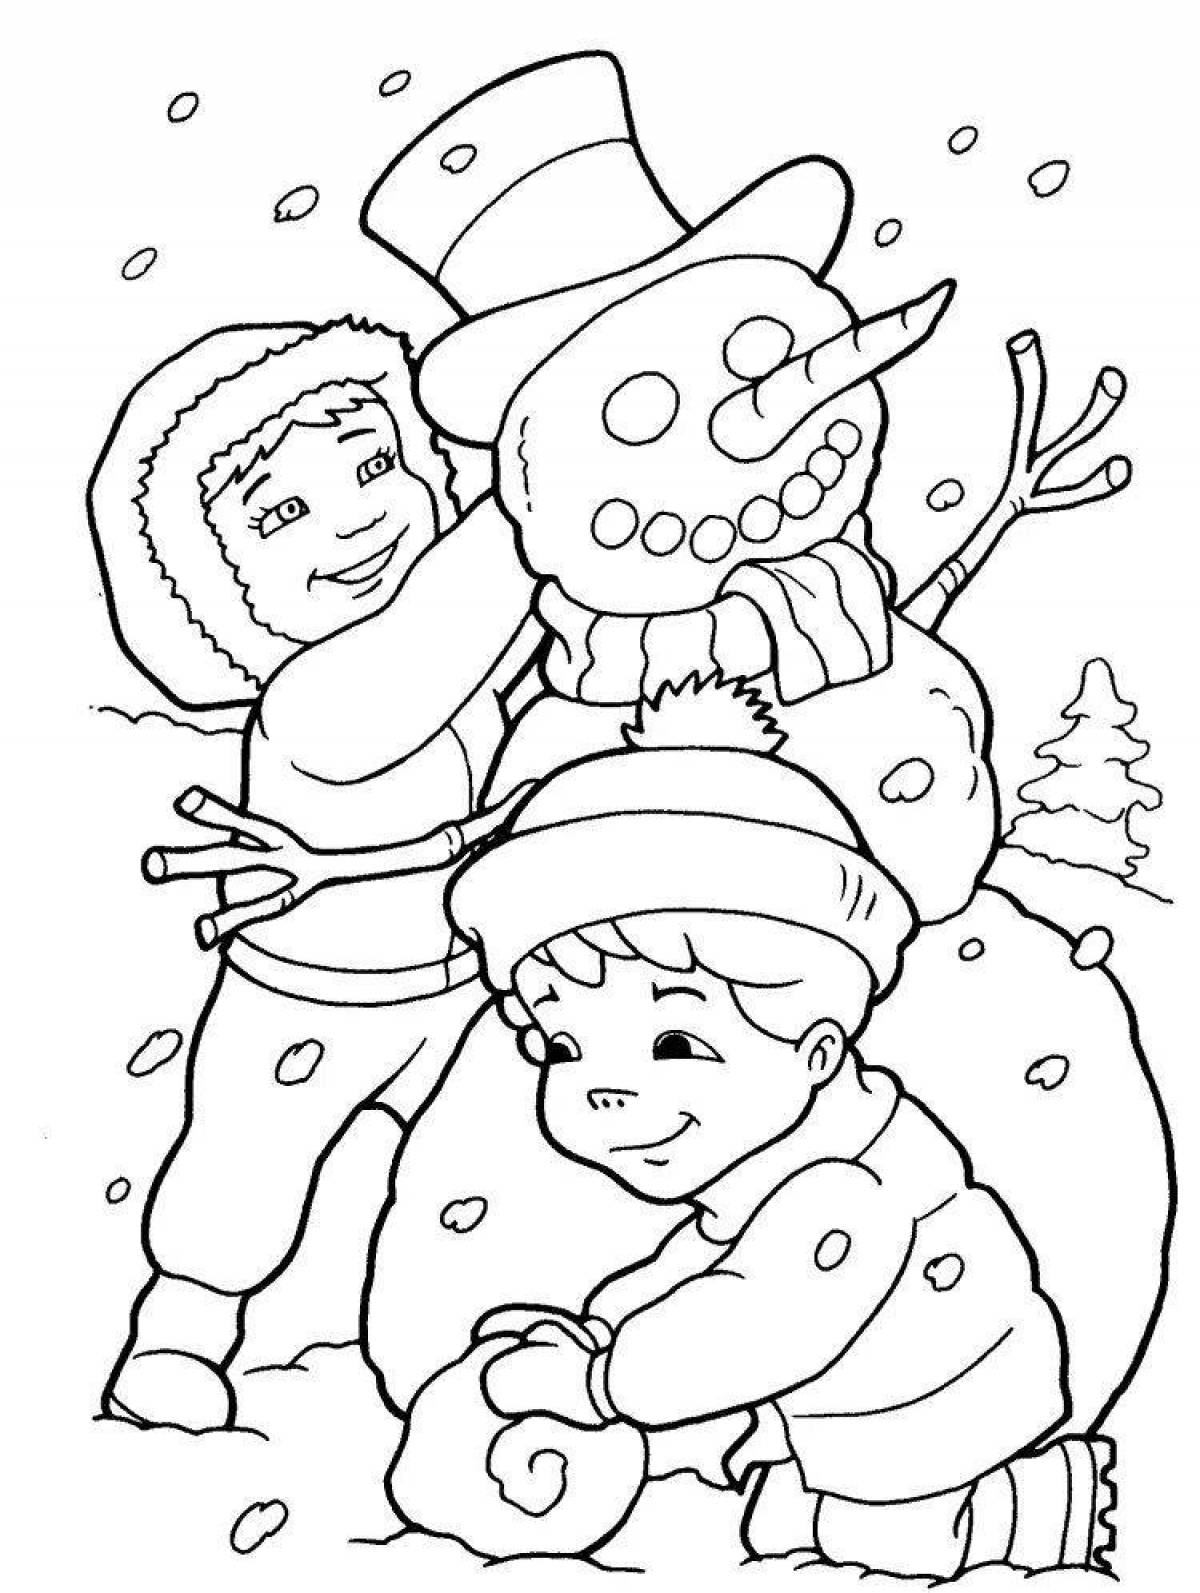 Whimsical children's winter coloring book